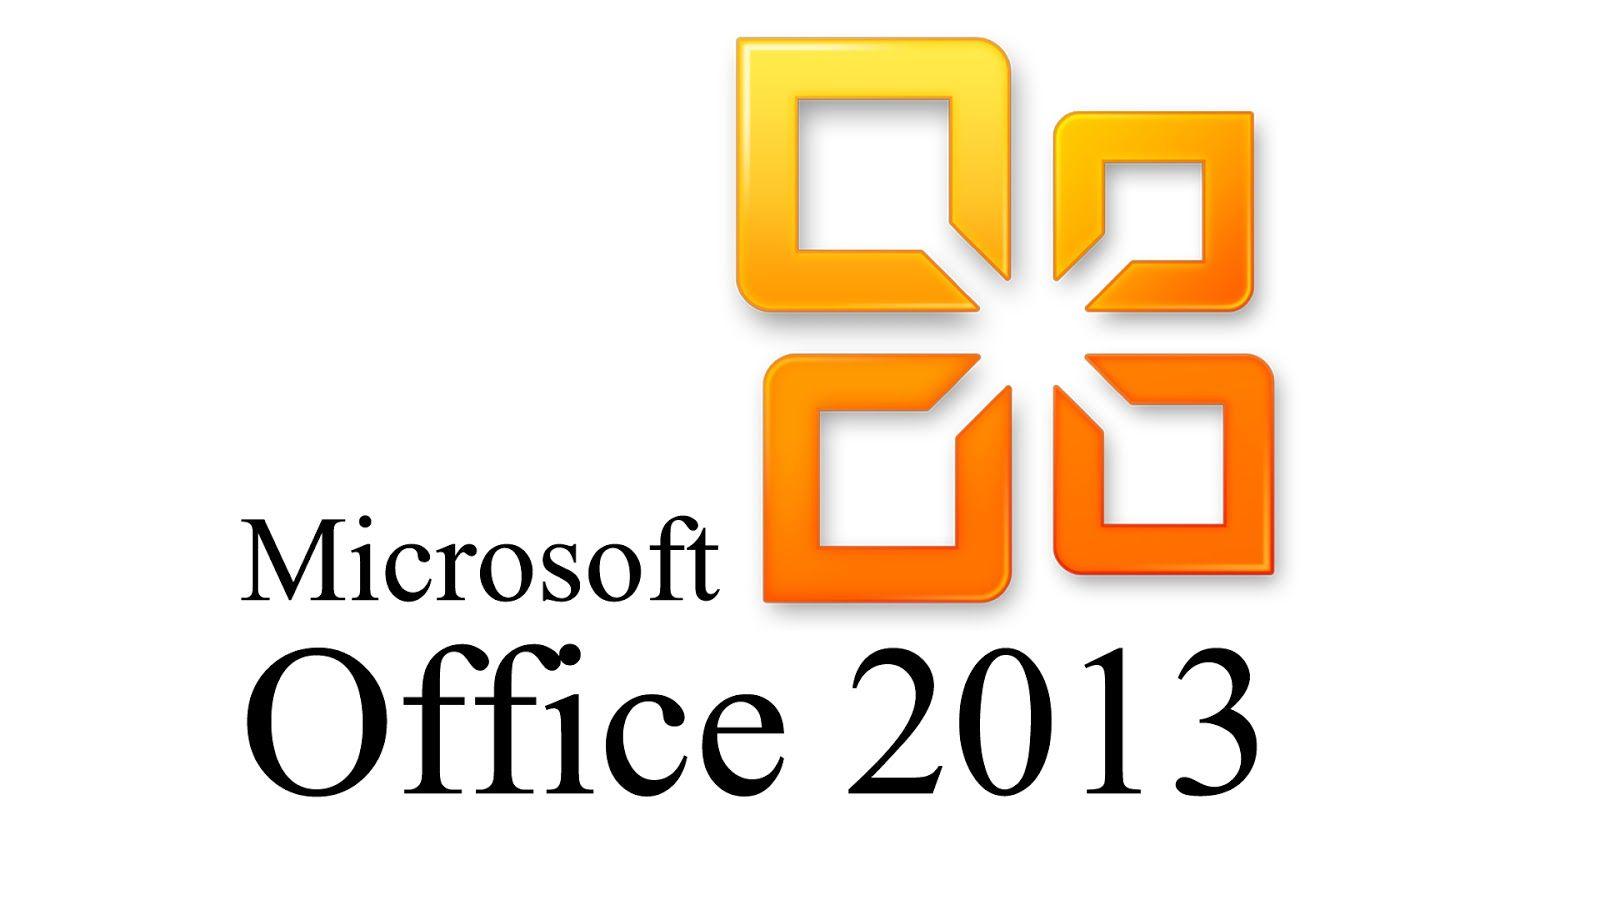 Word 2013 Logo - MS Office 2013 | Knowledge Dispensary